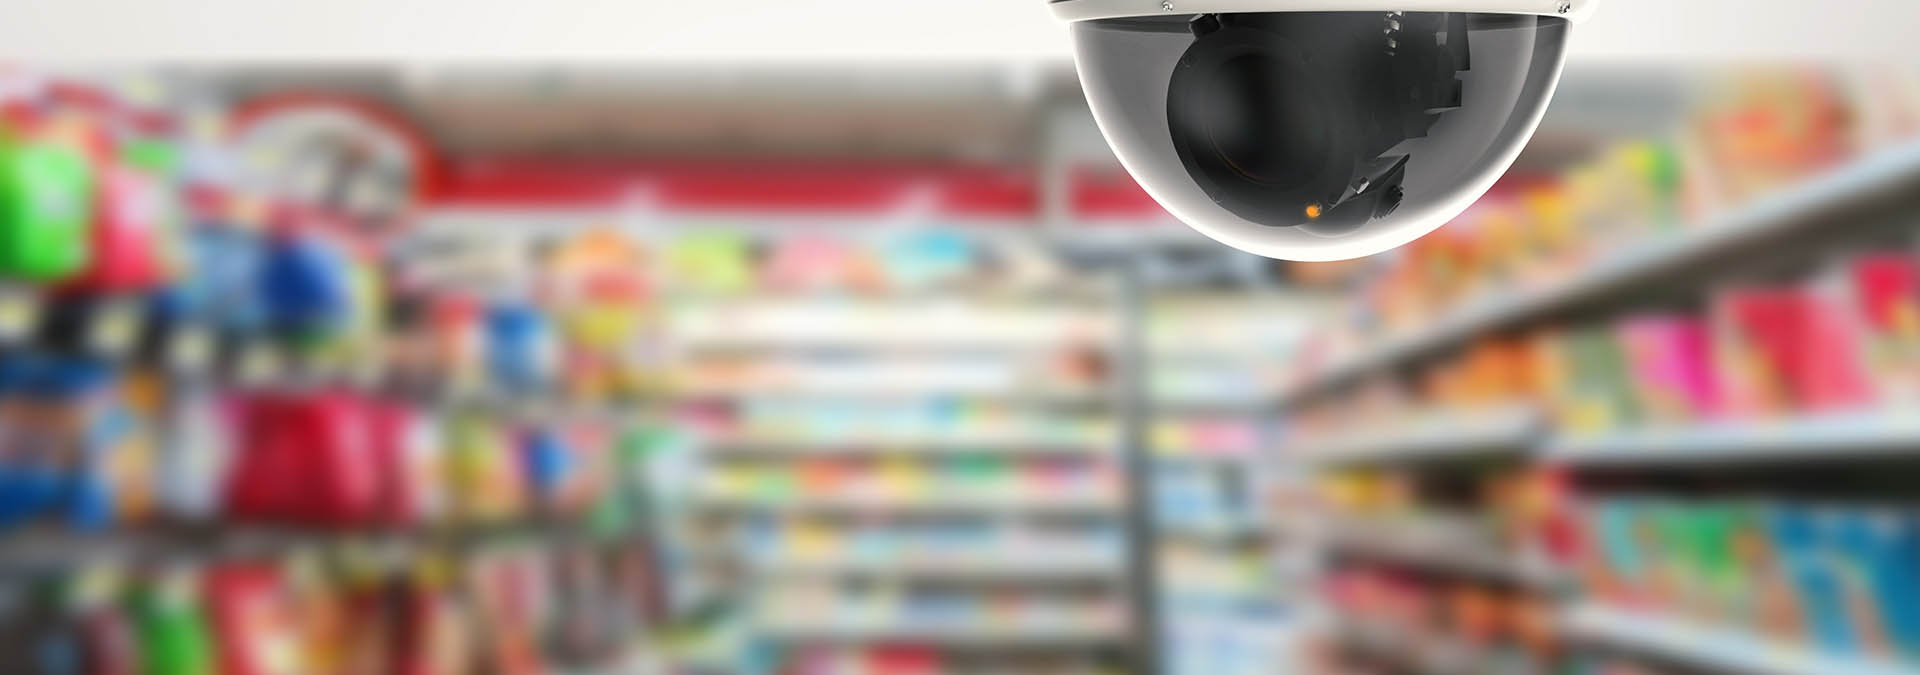 Photo of surveillance camera in a grocery store.